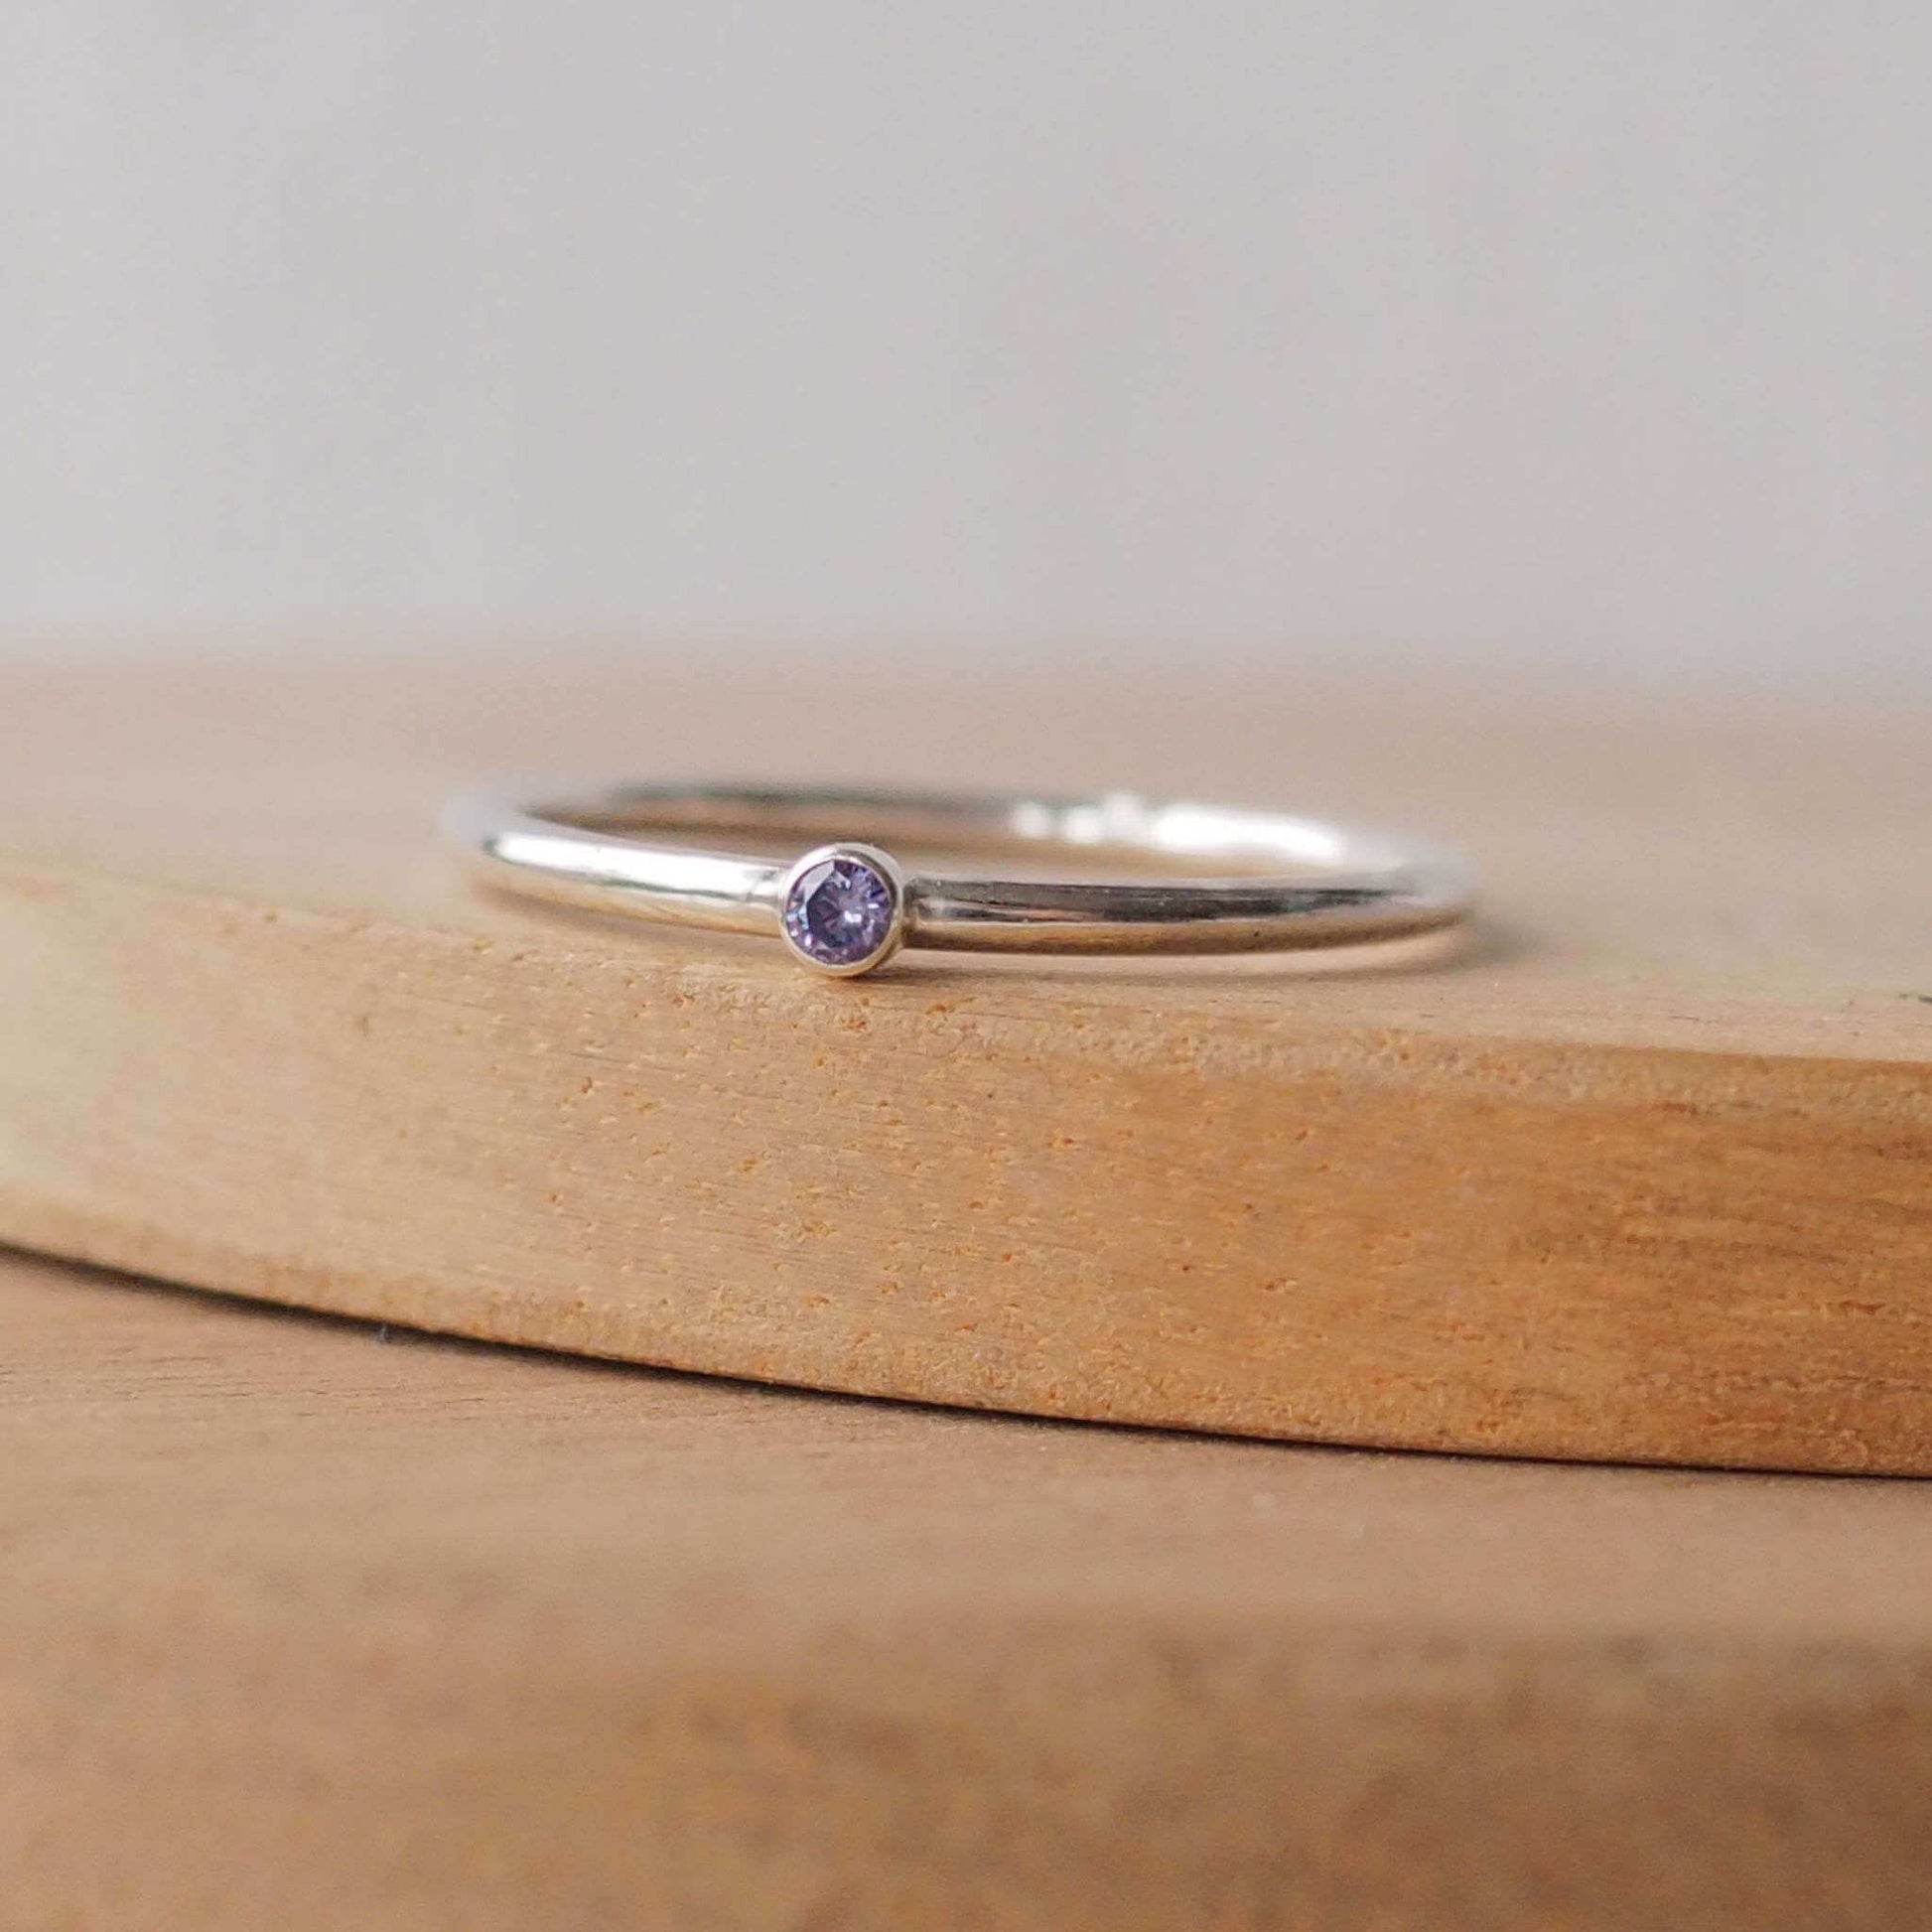 Silver ring with a light purple gemstone. The ring is simple in style with no embellishment , with a round wire band 1.5mm thick with a simple Tanzanite 2mm round cubic zirconia stone set in an enclosed silver setting. The gem is very small and minimal on the band. Tanzanite is birthstone for December. The ring is Sterling Silver and made to your ring size. Handmade in Scotland by Maram Jewellery